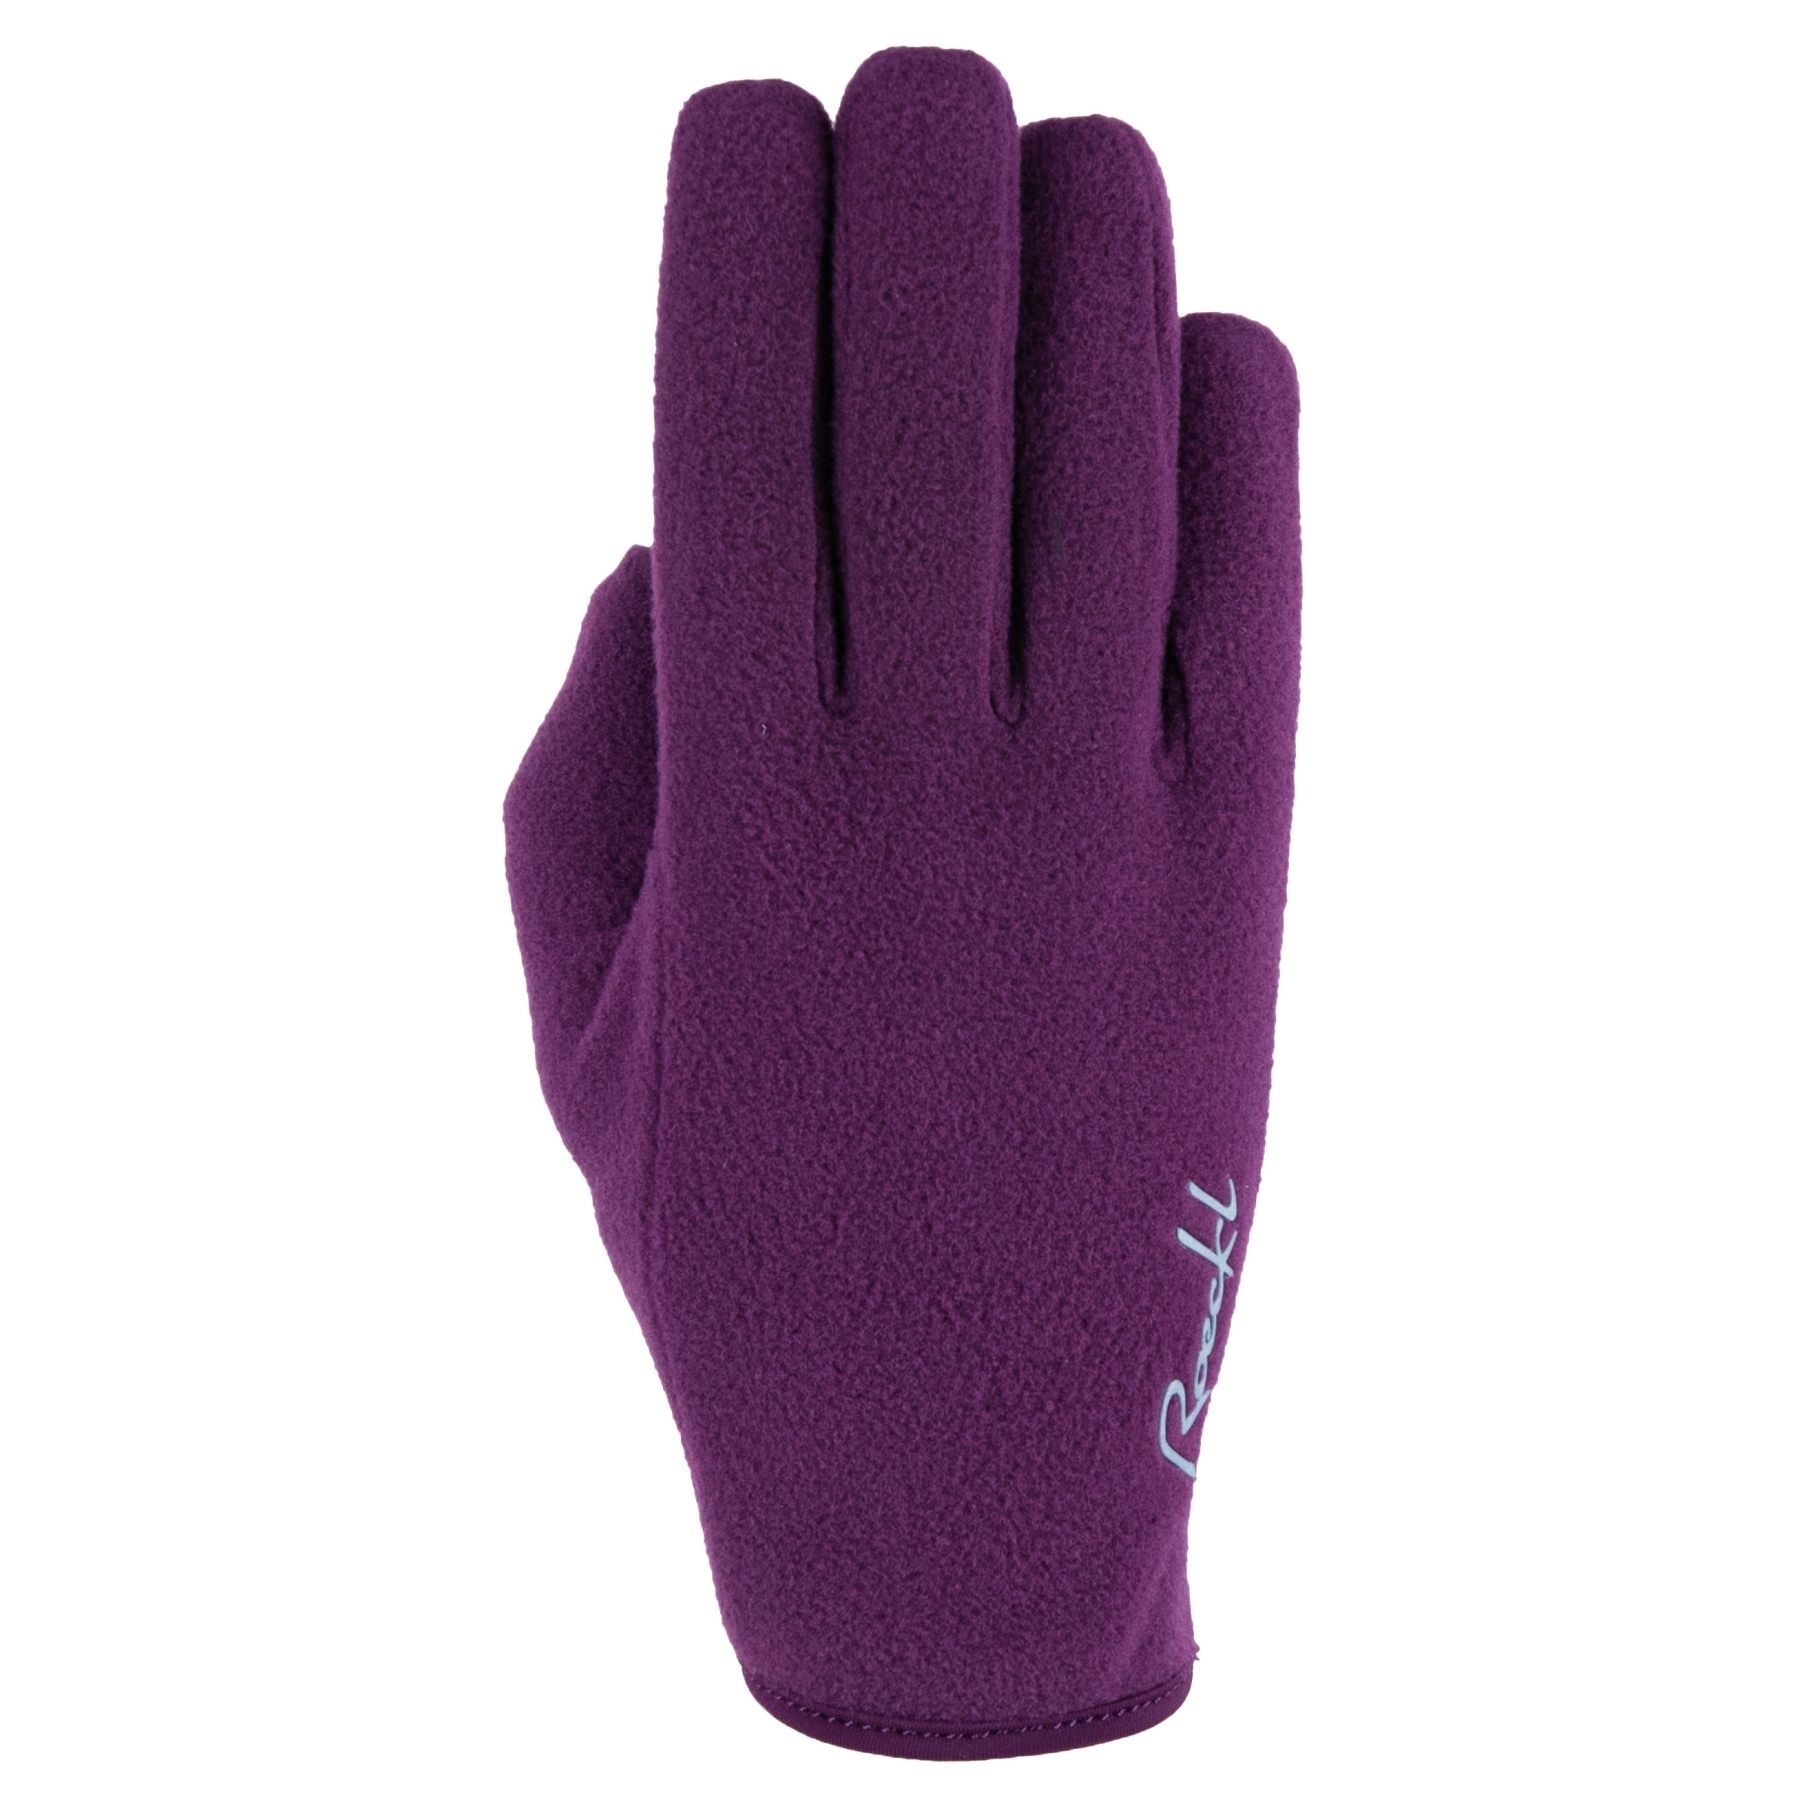 Picture of Roeckl Sports Kampen Juniors Winter Gloves - grape wine 0485